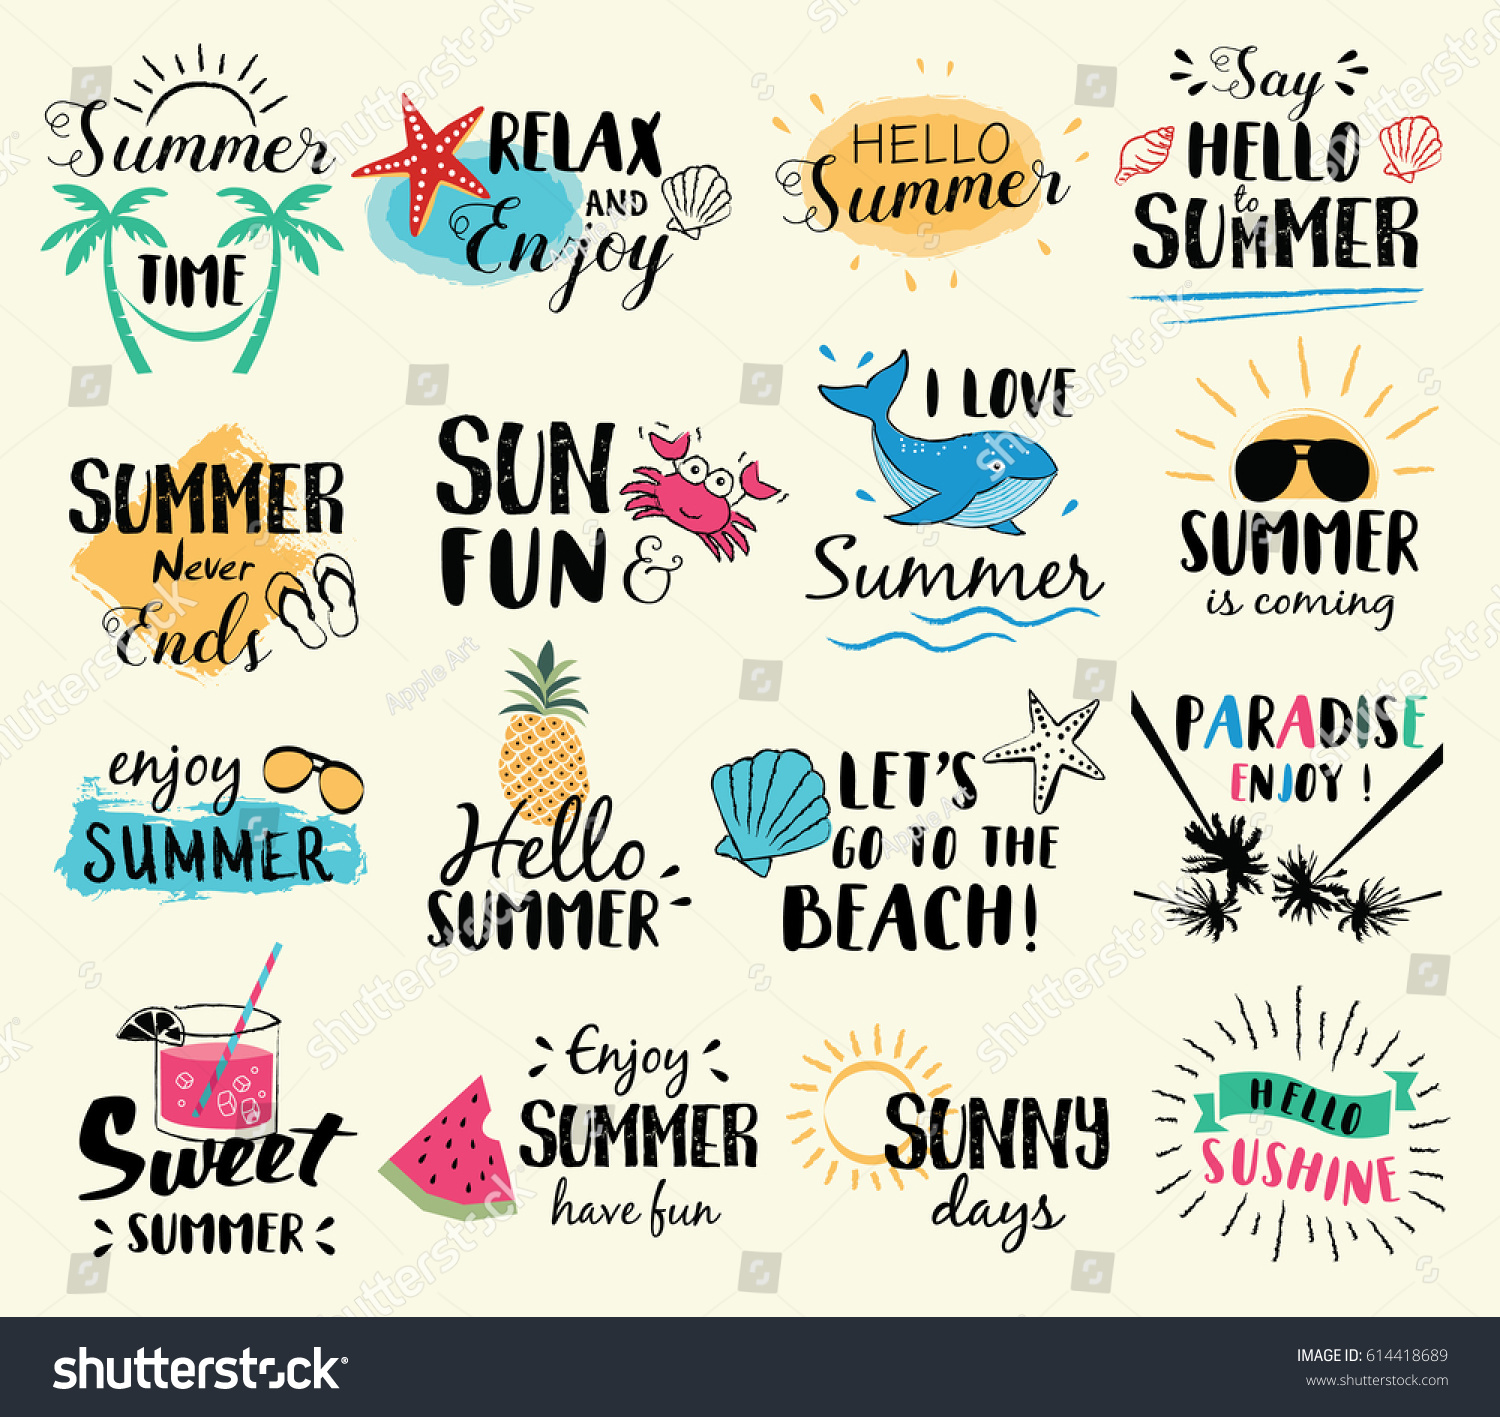 Summer labels, logos, hand drawn tags and elements set for summer holiday, travel, beach vacation, sun. Vector illustration. #614418689